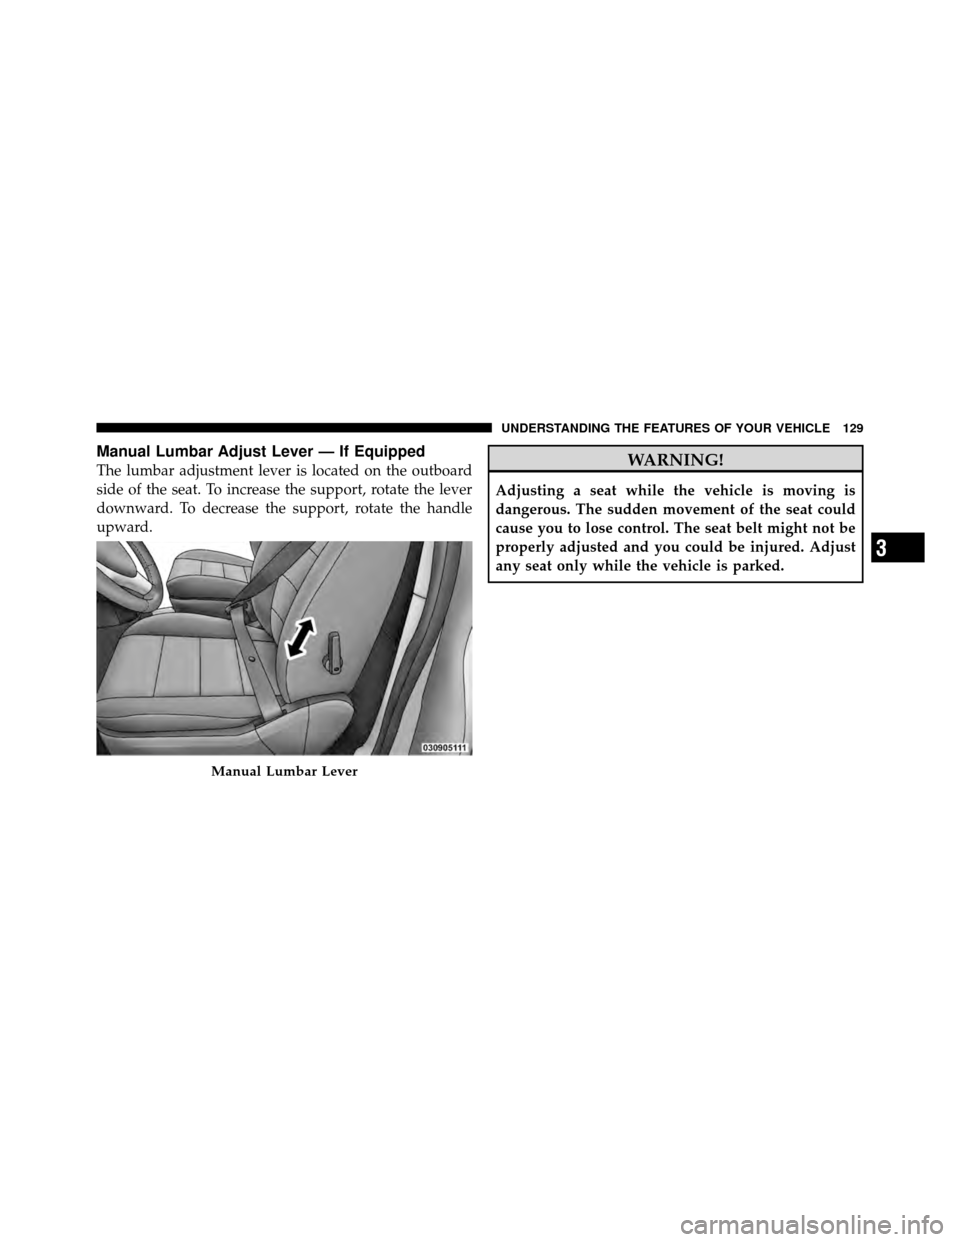 CHRYSLER TOWN AND COUNTRY 2010 5.G Owners Manual Manual Lumbar Adjust Lever — If Equipped
The lumbar adjustment lever is located on the outboard
side of the seat. To increase the support, rotate the lever
downward. To decrease the support, rotate 